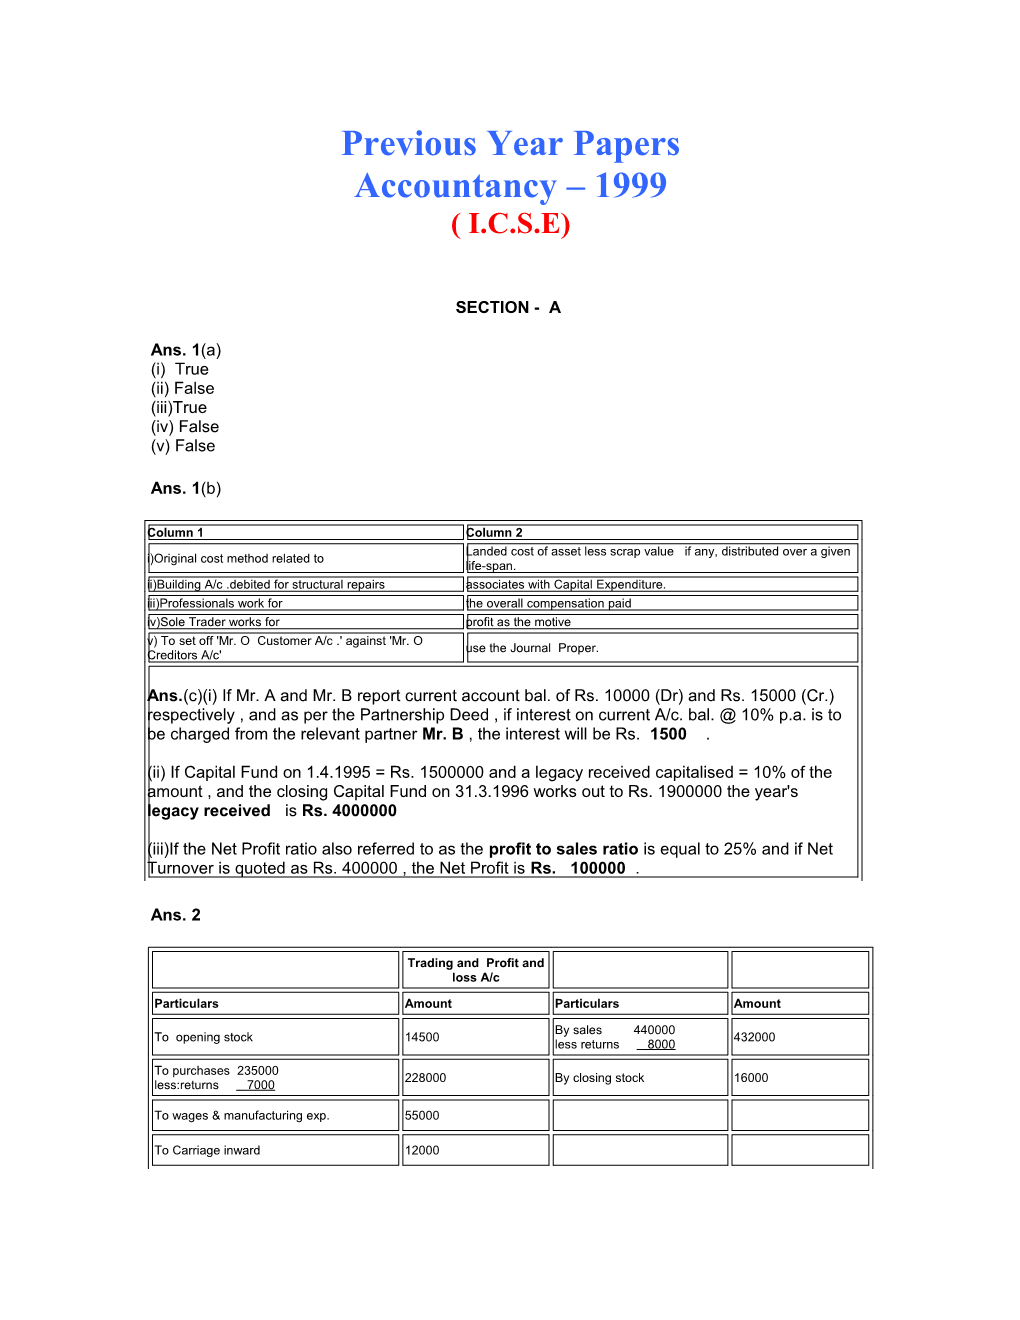 Previous Year Papers Accountancy 1999 ( I.C.S.E)